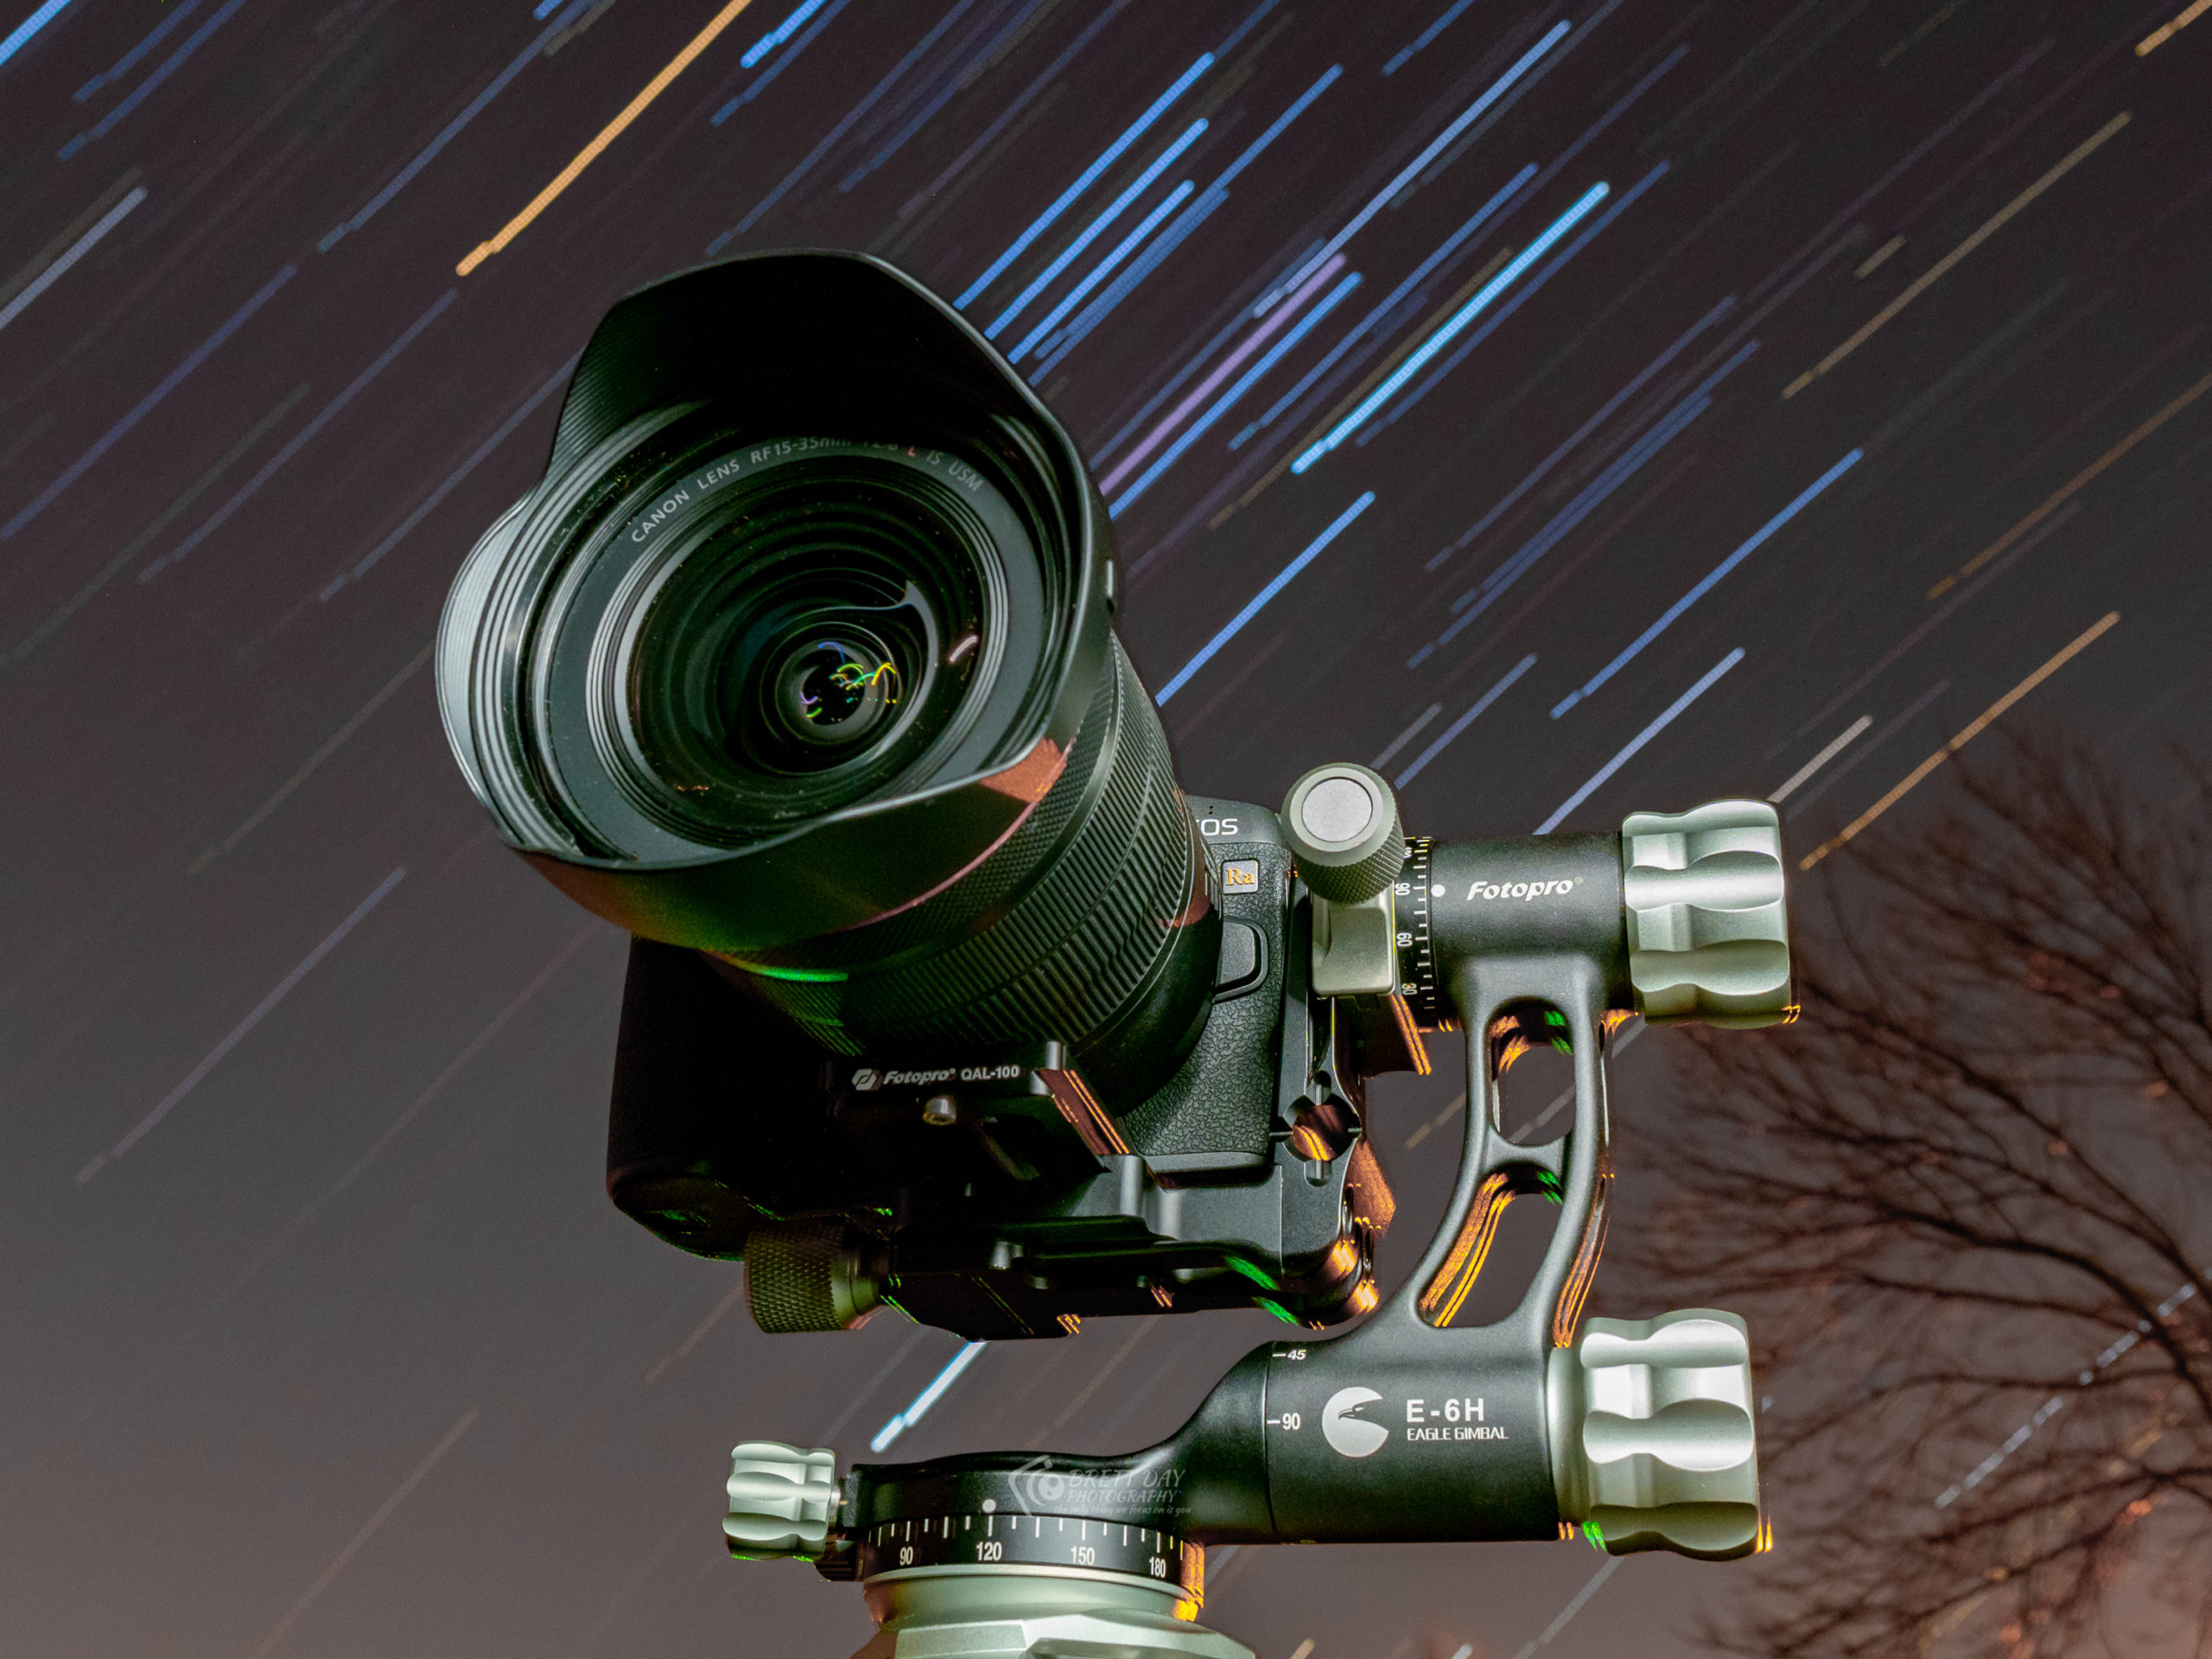 Astrophotography Basics That Will Serve Newcomers Well This Season